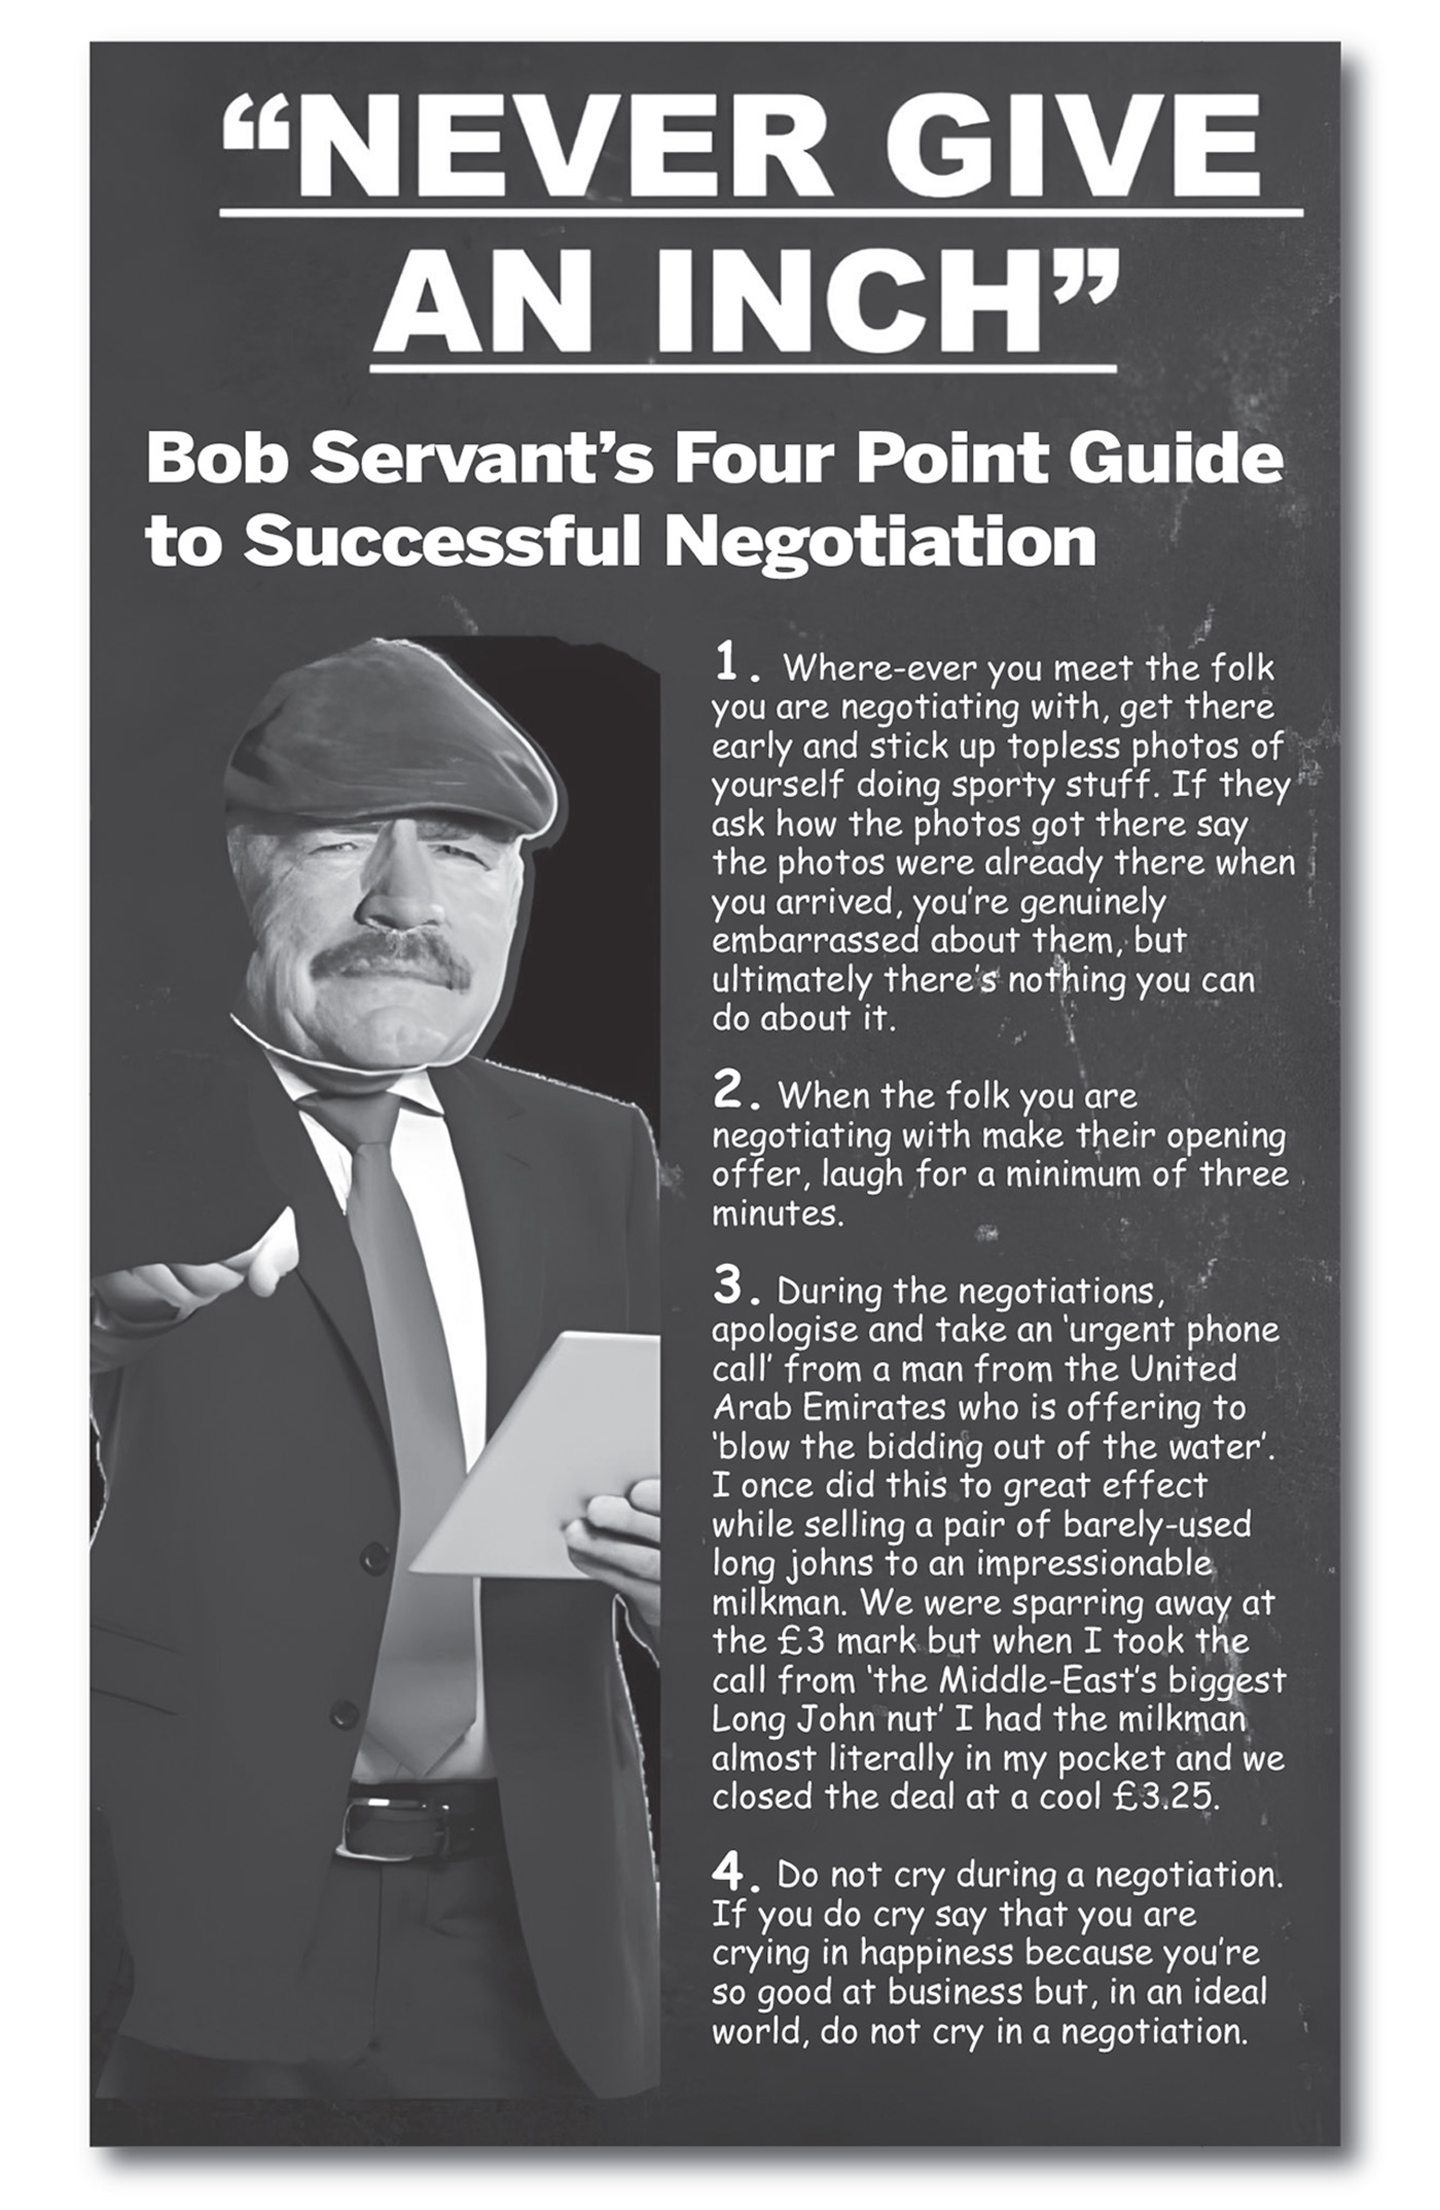 An image from the new Bob Servant book.